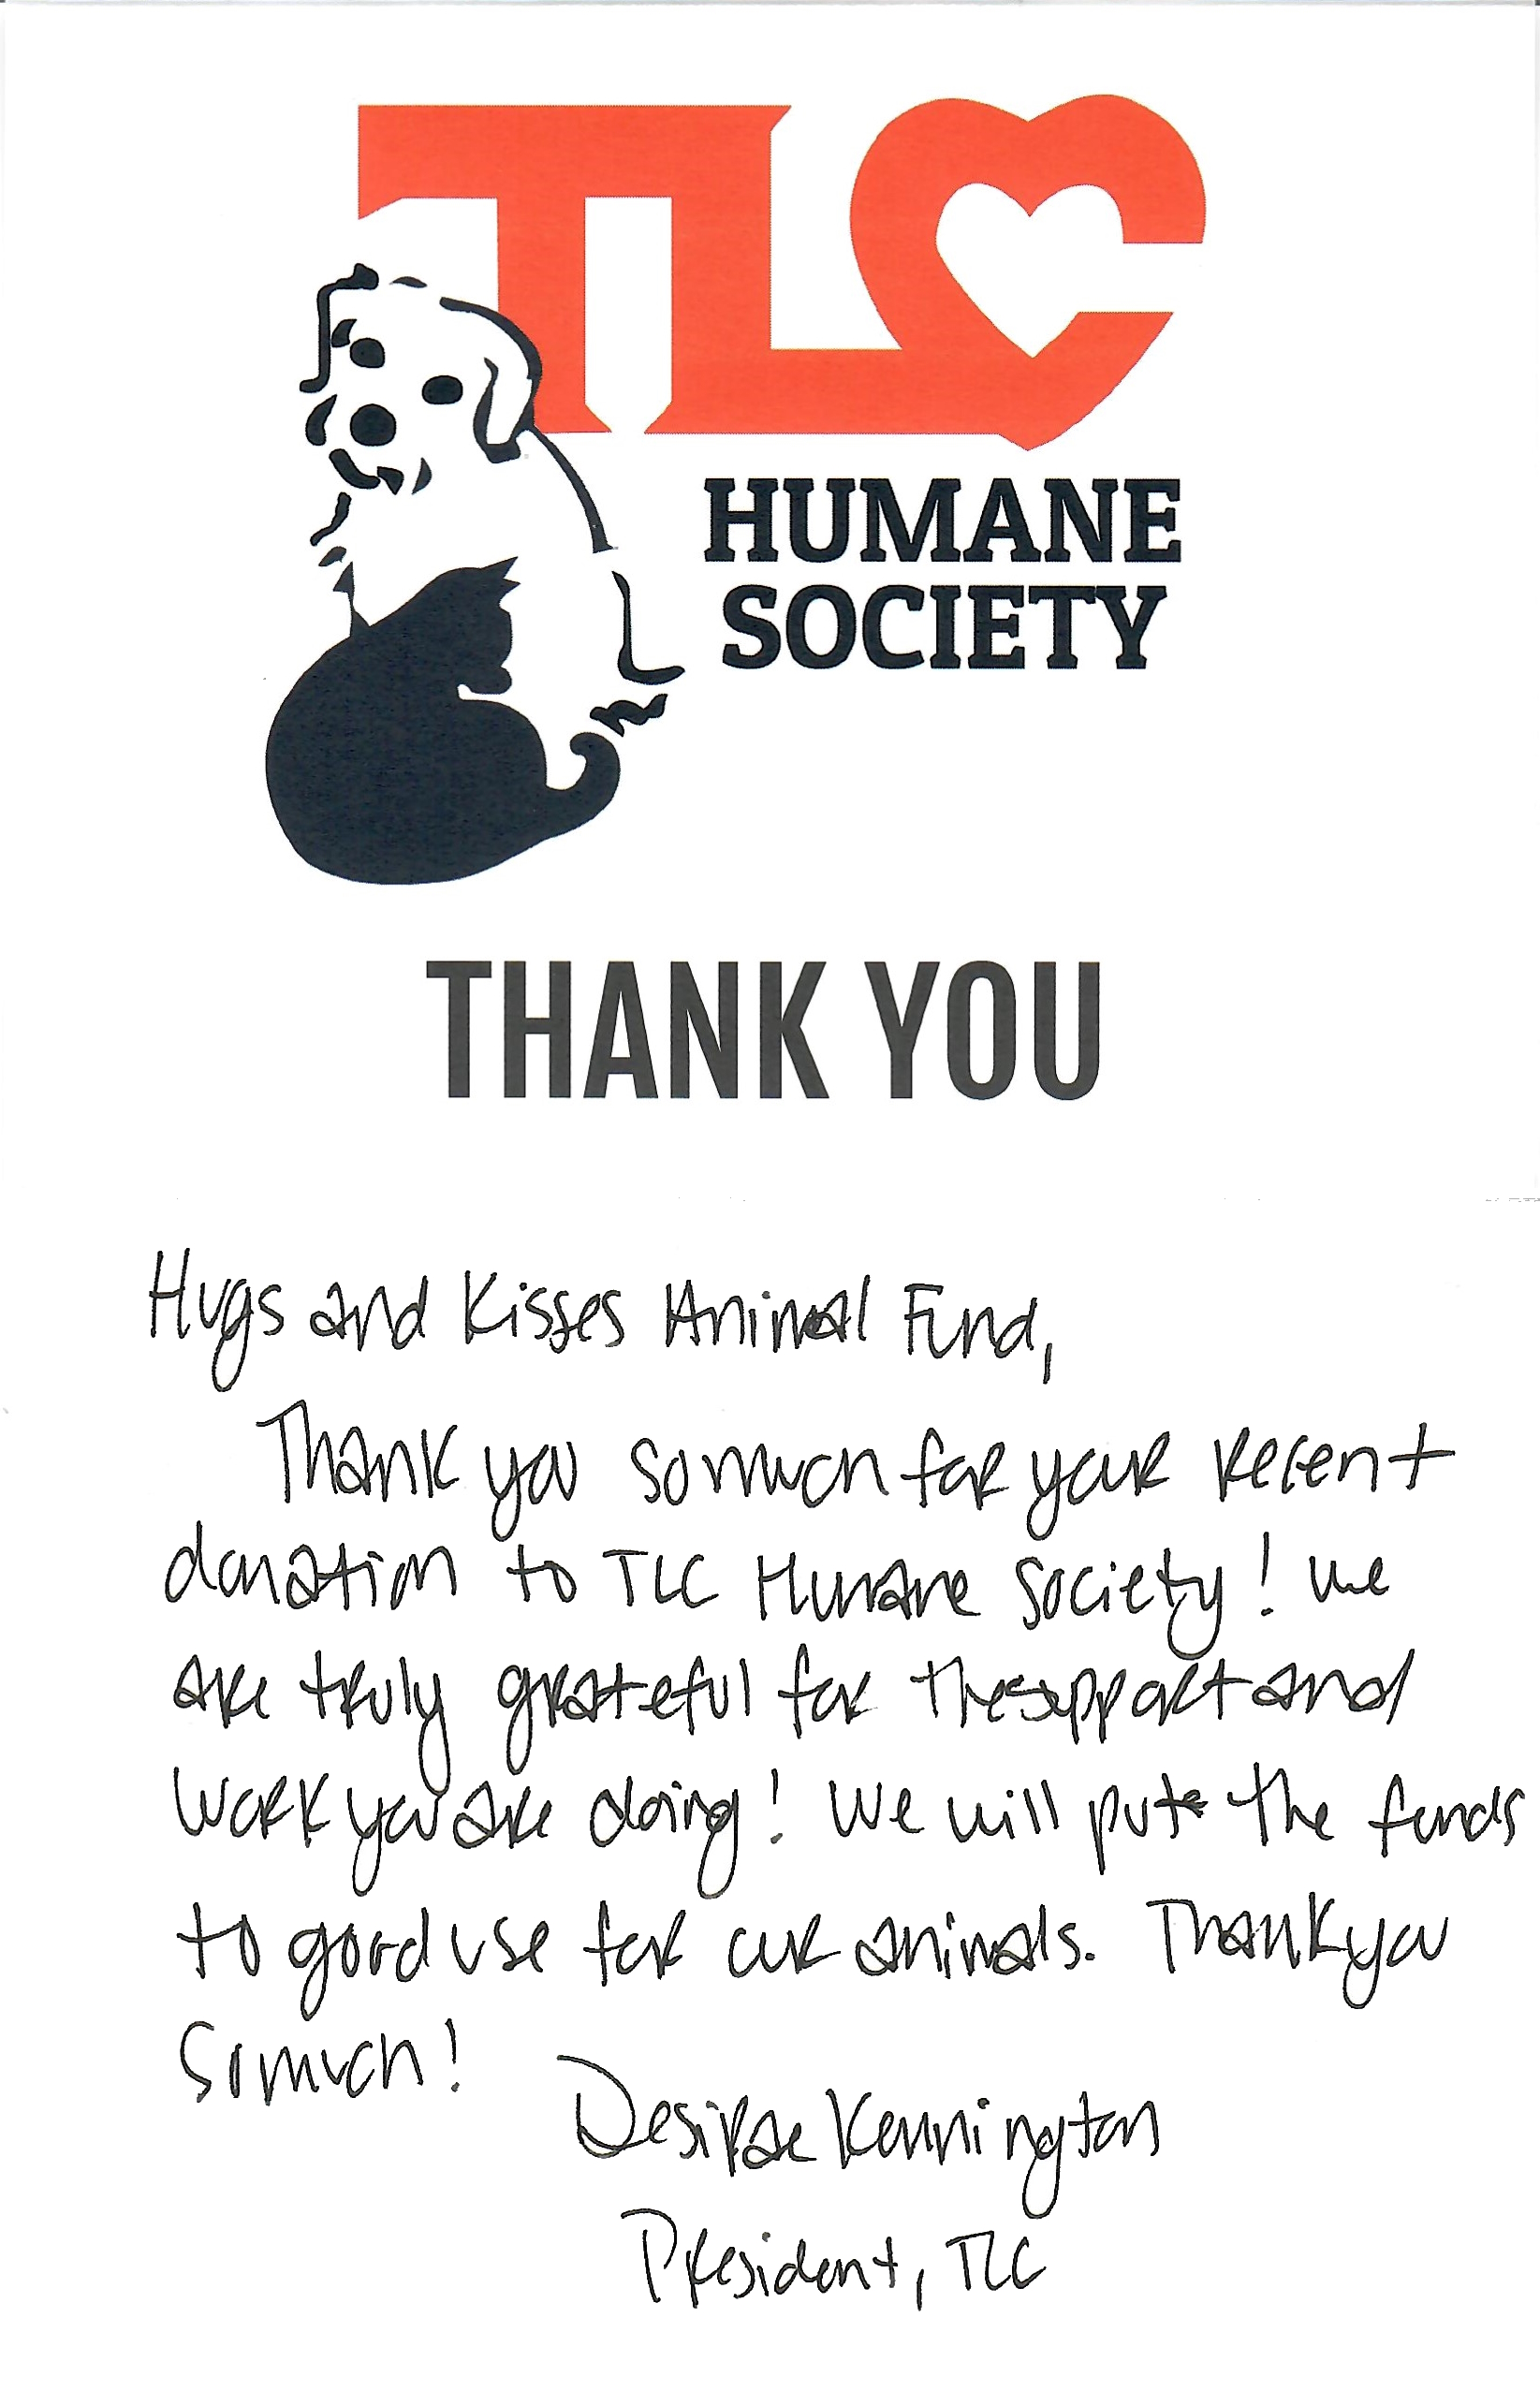 Thank you letter from TLC Humane Society